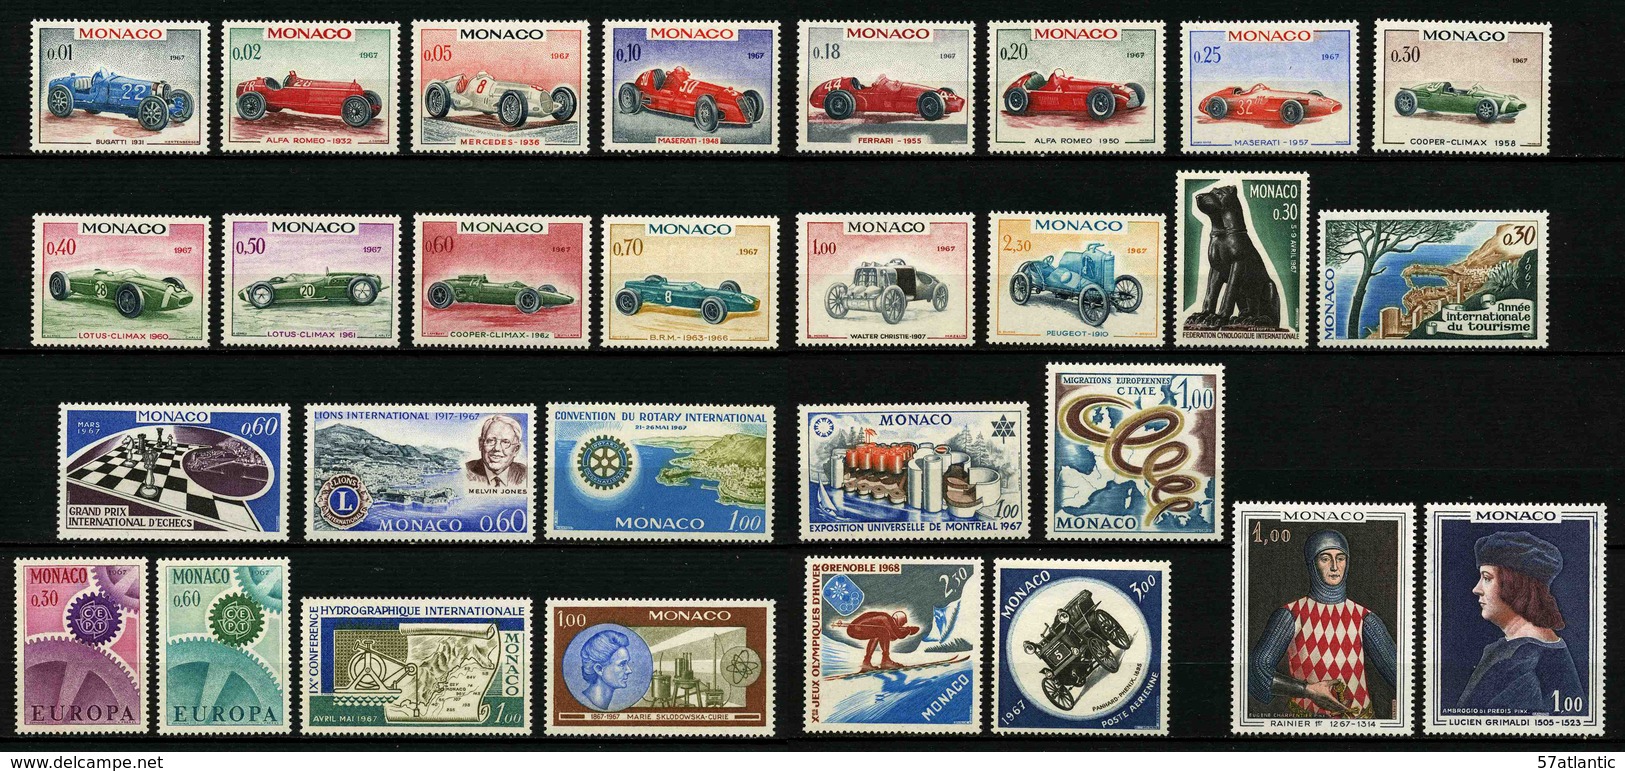 MONACO - ANNEE COMPLETE 1967 - YT 708 à 735 ** + PA 91 ** -  29 TIMBRES NEUFS ** - Full Years